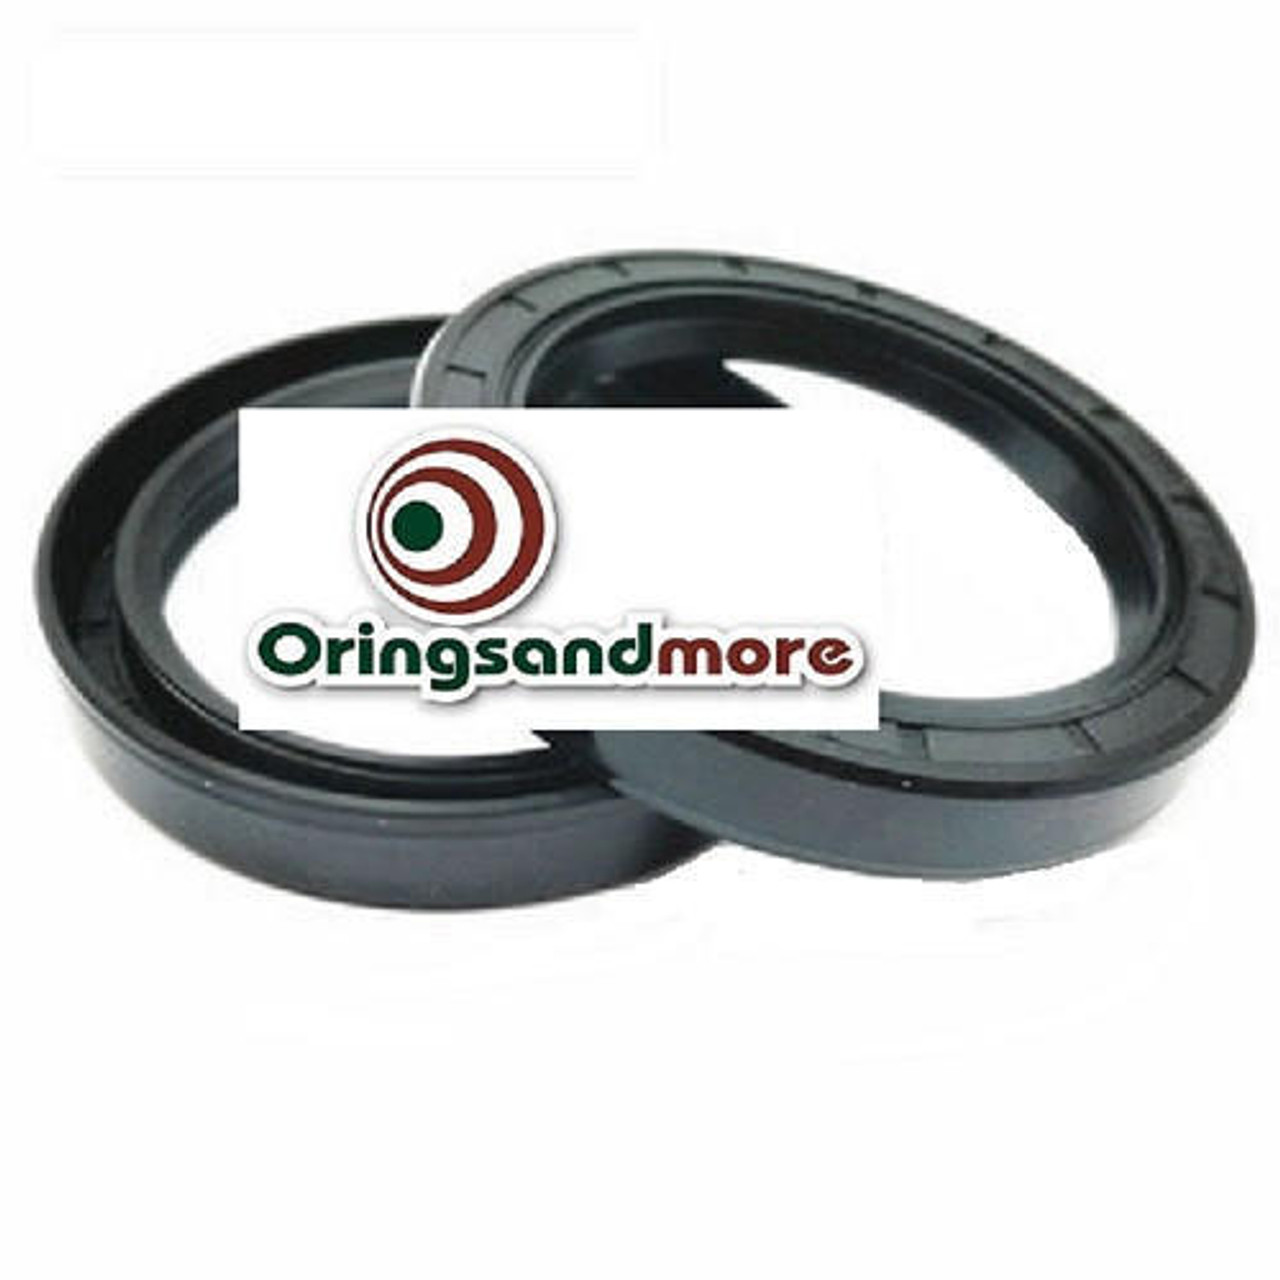 Metric Oil Shaft Seal 25 x 34 x 5mm Double Lip Price for 1 pc